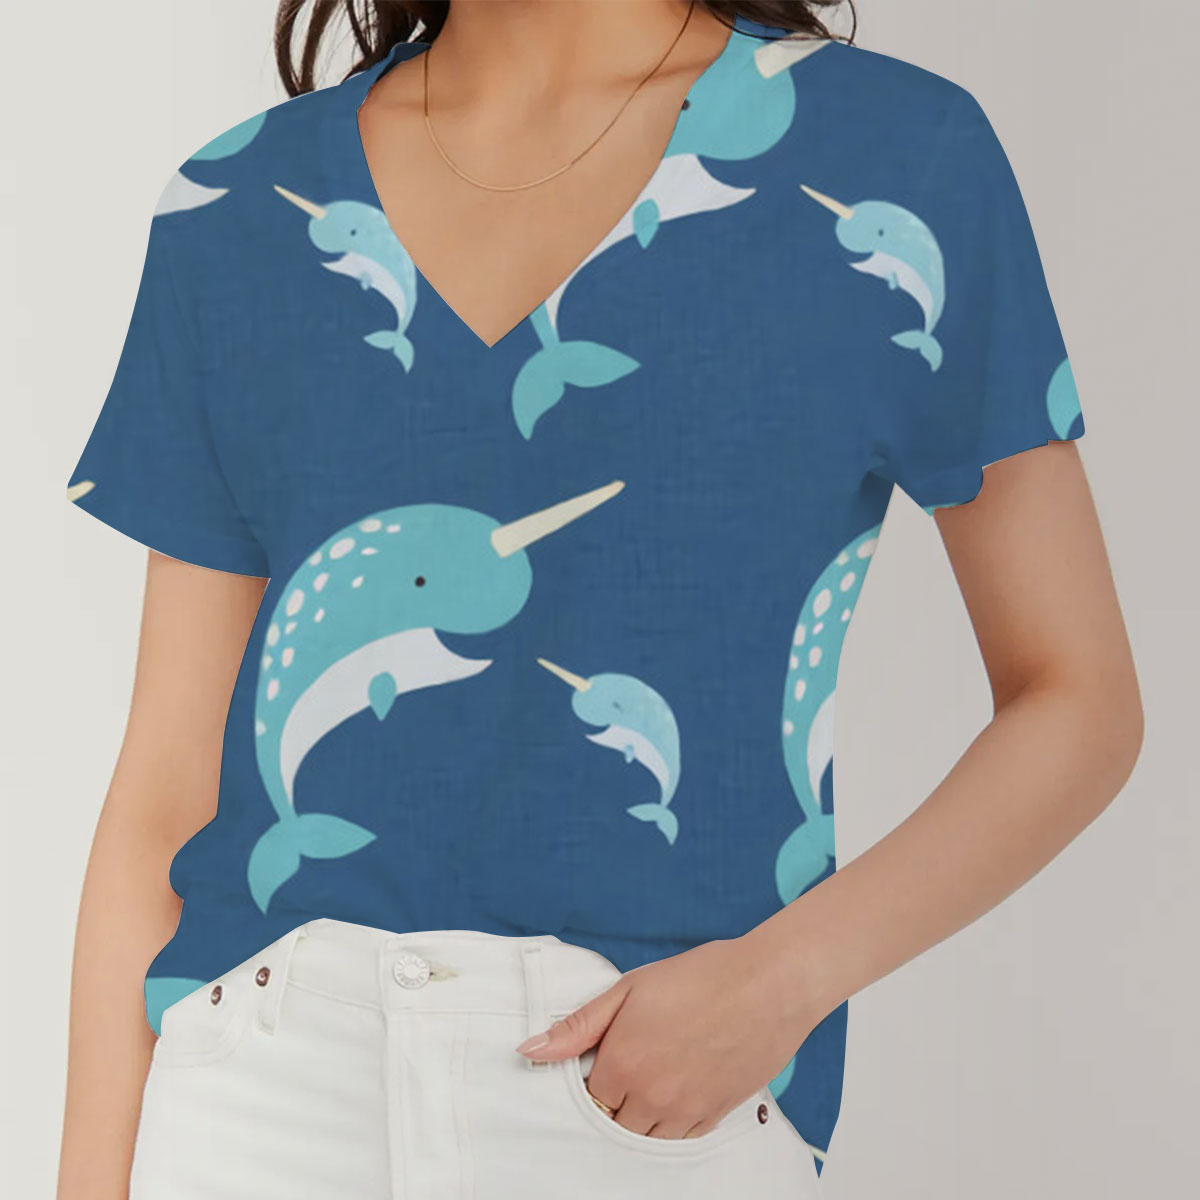 Big And Small Narwhal V-Neck Women's T-Shirt